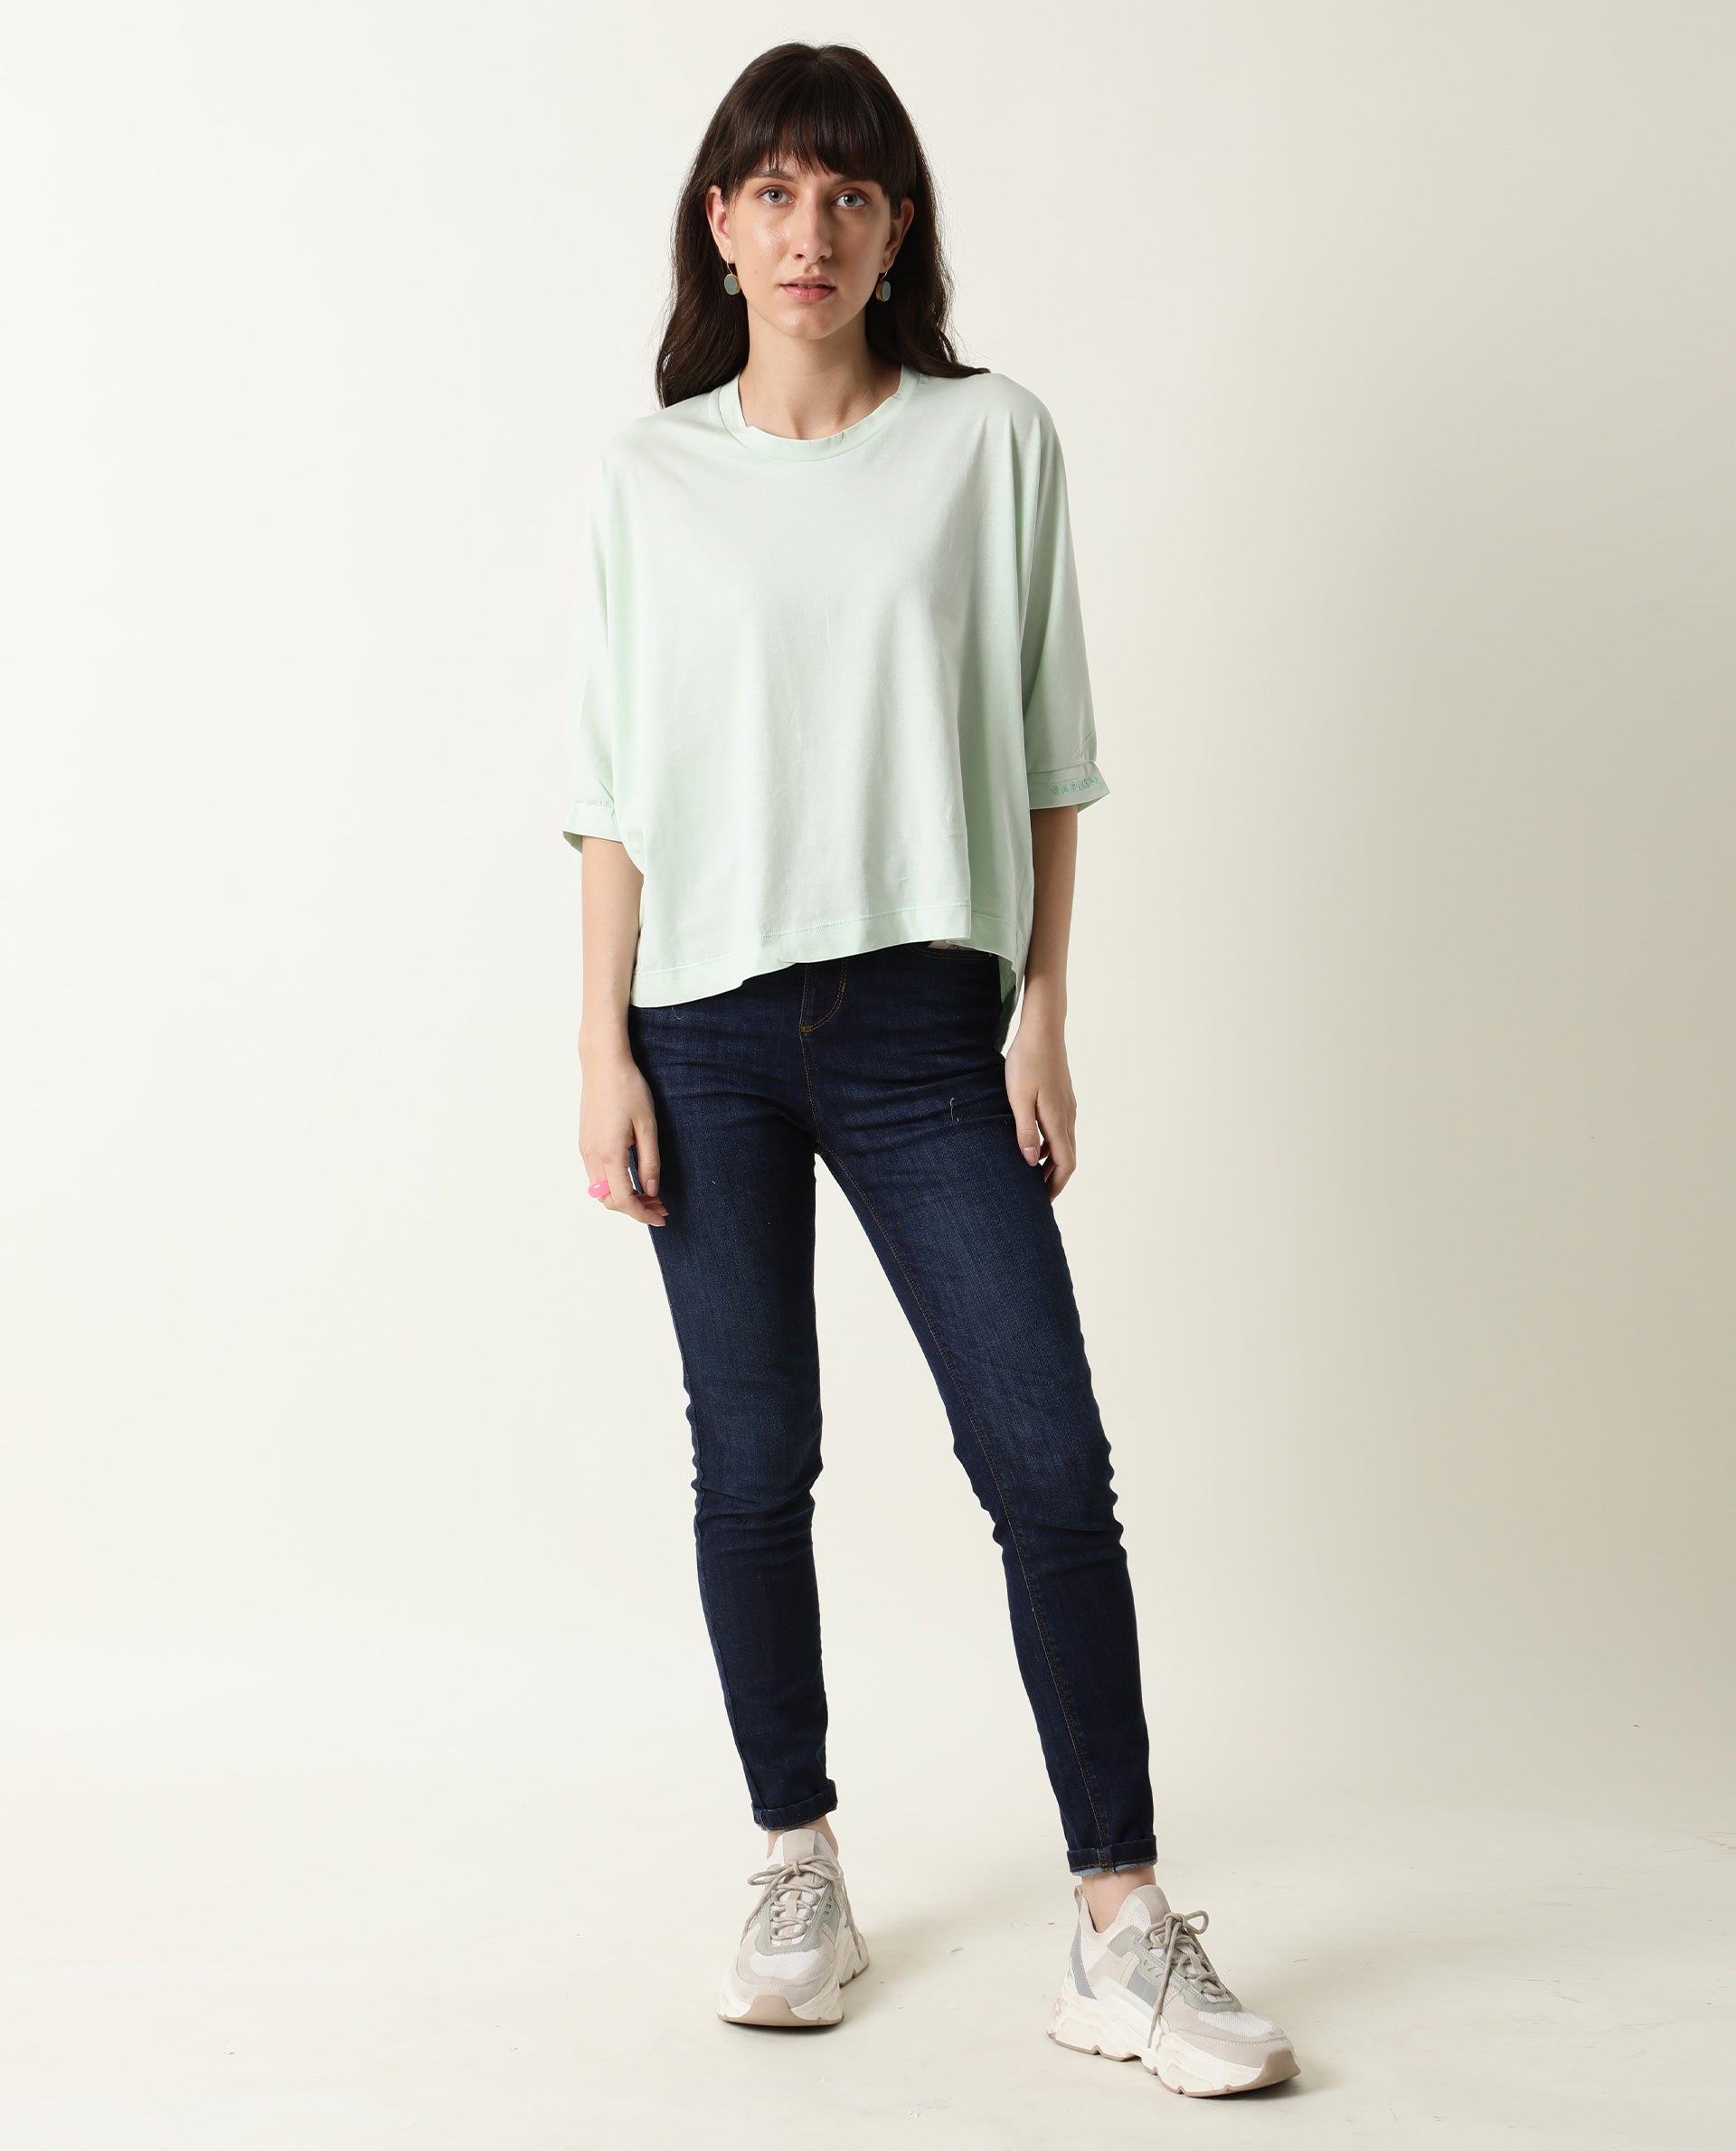 WOMENS OSMO GREEN TOP Cotton FABRIC Regular FIT Volume Sleeve Round Neck